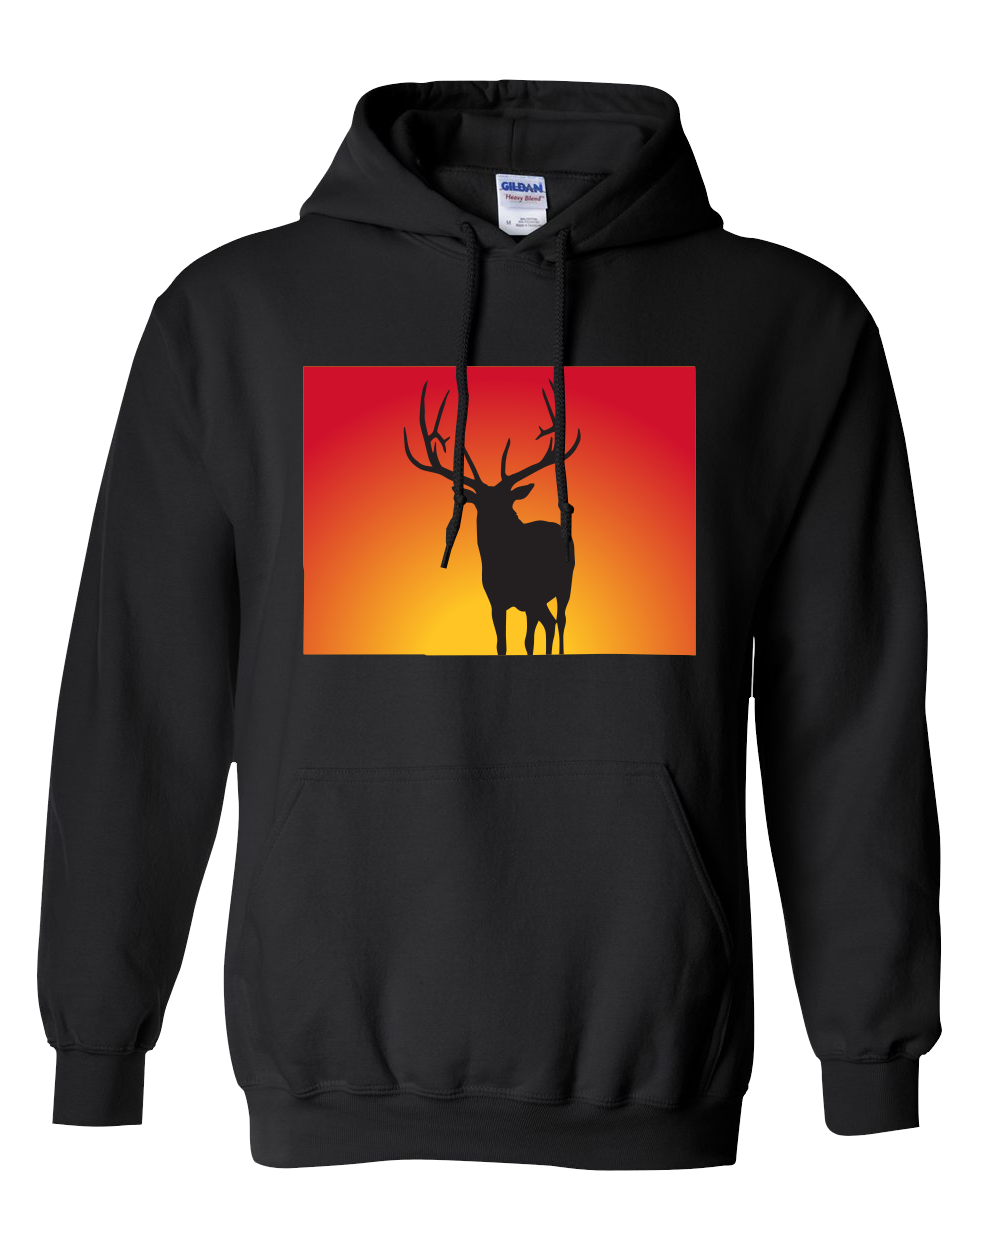 Pullover Hooded Sweatshirt Colorado Black Elk Vibrant Design High Quality Tight Knit Ring Spun Low Maintenance Cotton Printed With The Newest Available Color Transfer Technology